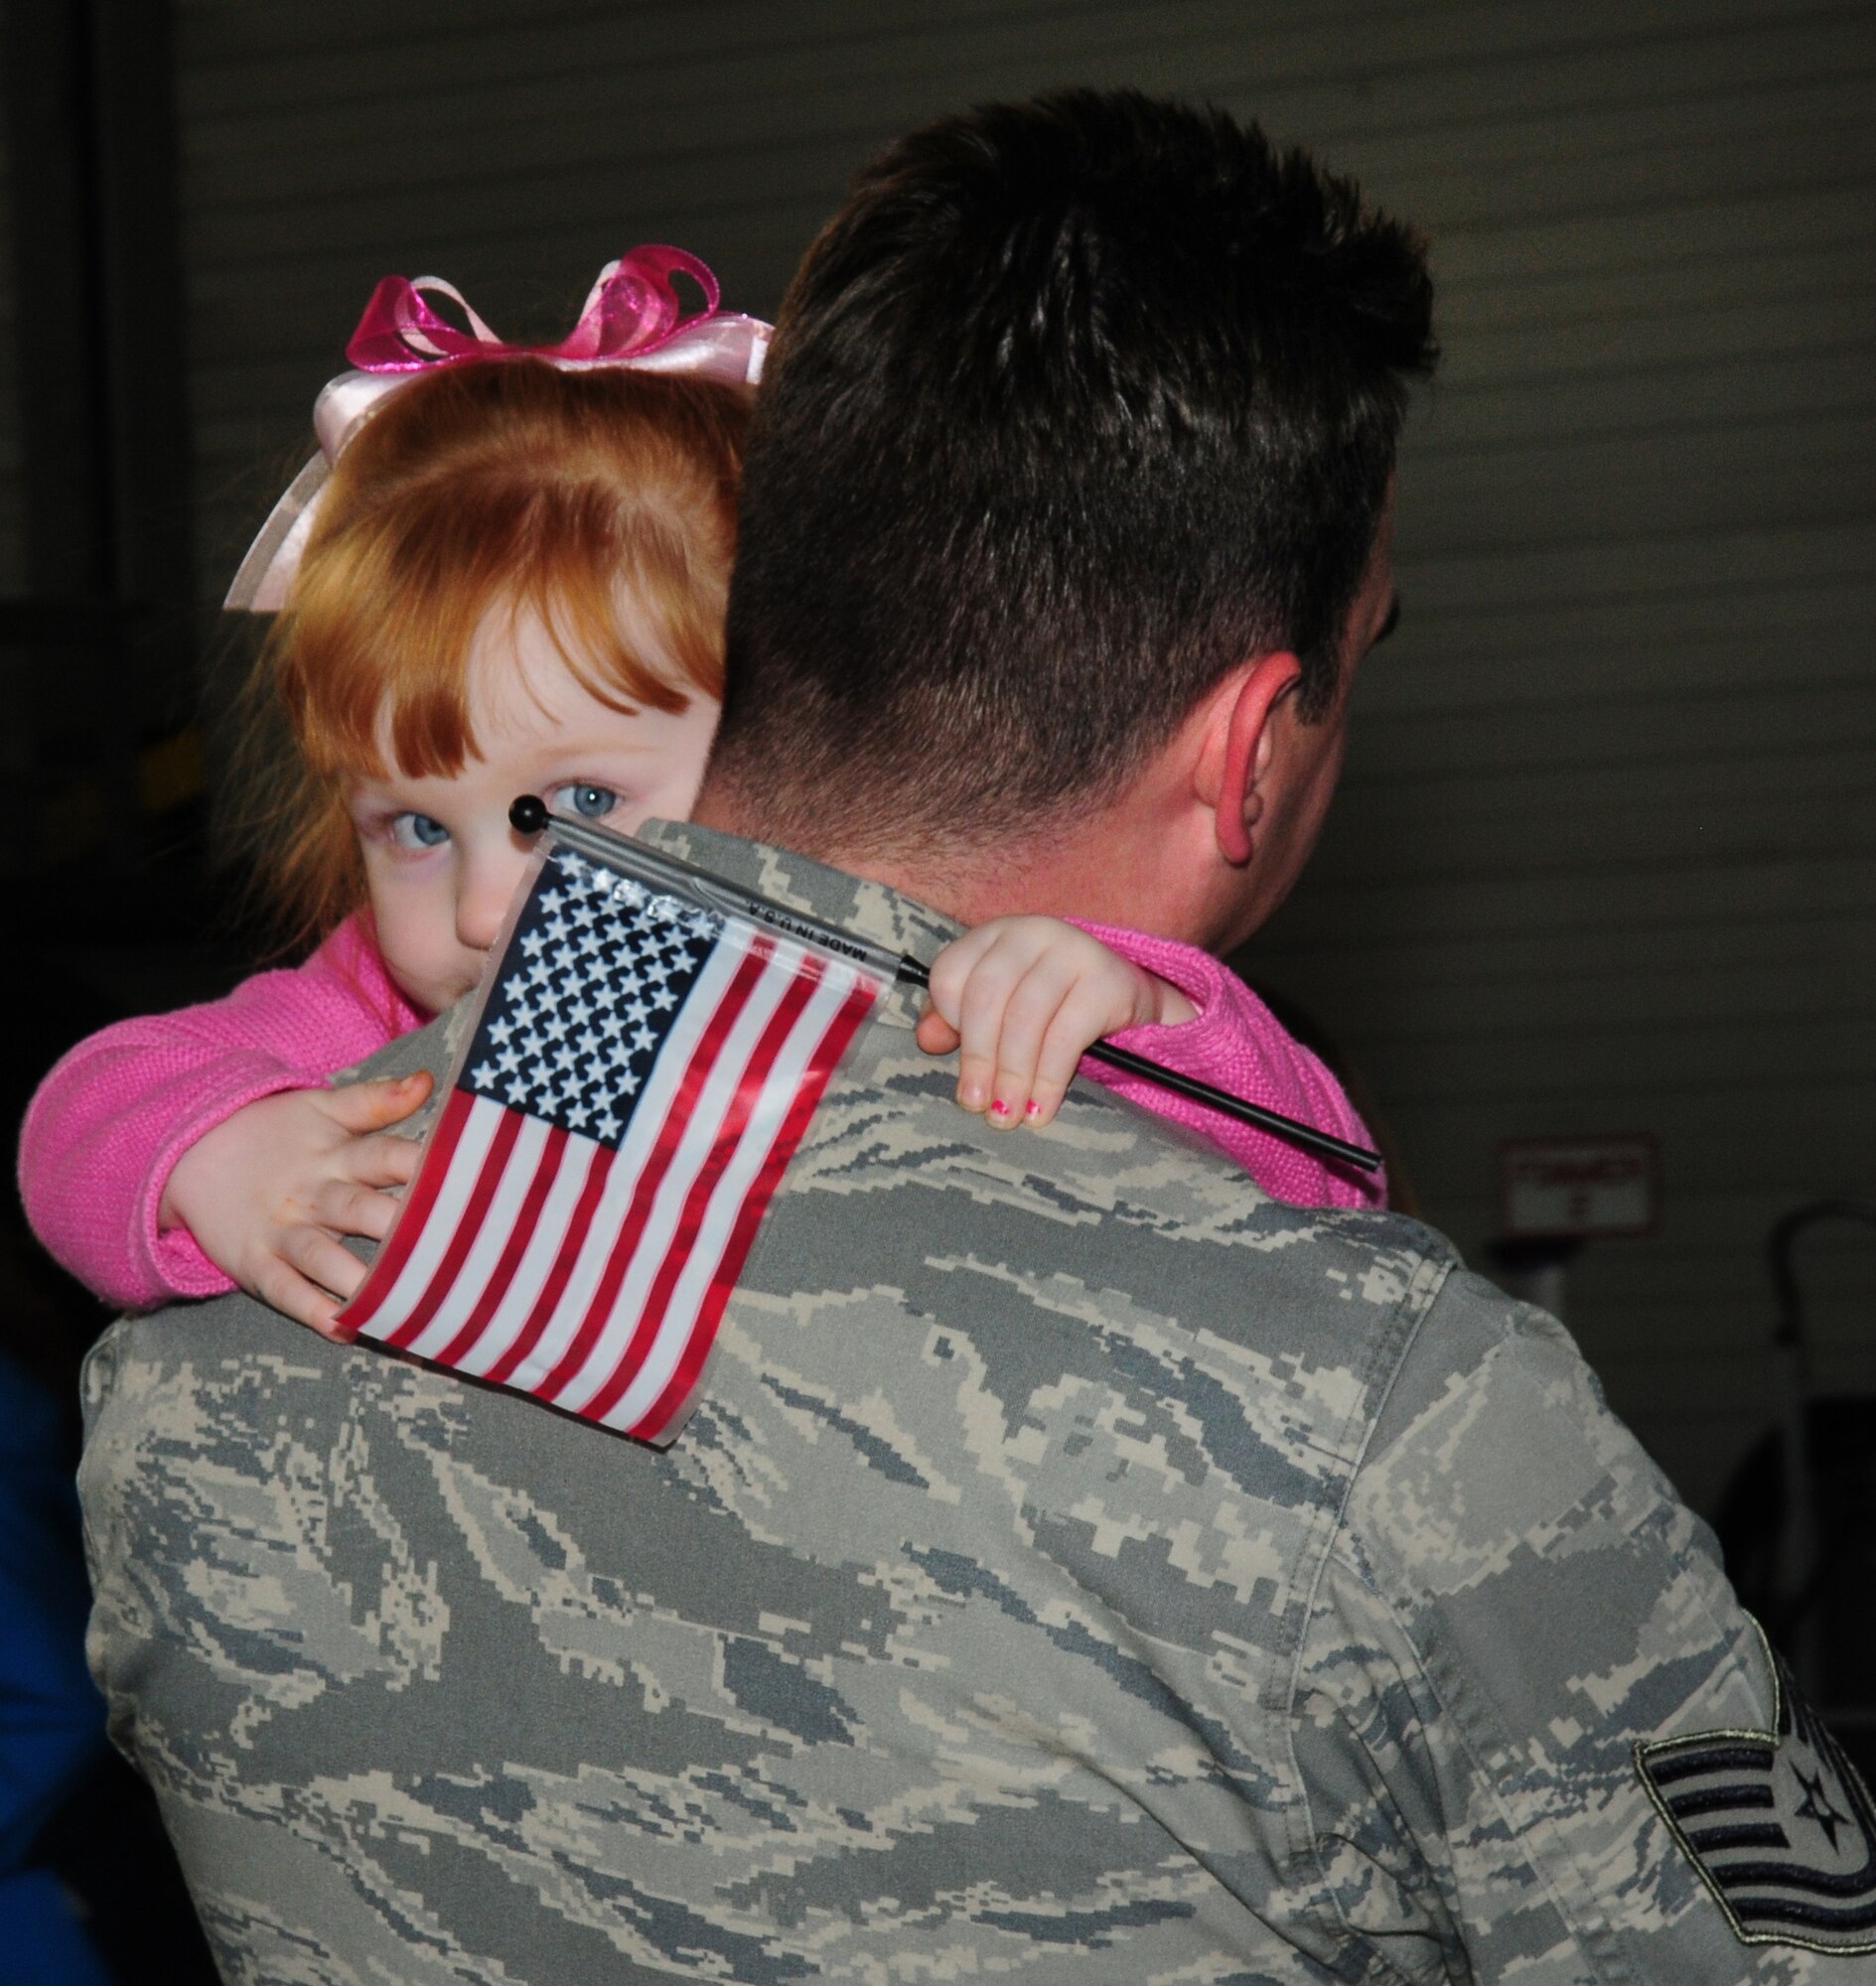 SPANGDAHLEM AIR BASE, Germany – Madison Mason peers over her father’s shoulder while clutching a small American flag during the 81st Fighter Squadron redeployment. Her father, Tech. Sgt. Cole Mason, 52nd Medical Support Squadron laboratory NCOIC, deployed to Afghanistan in 2009 and attended to support the return of his fellow servicemembers. (U.S. Air Force photo/Staff Sgt. Heather M. Norris)